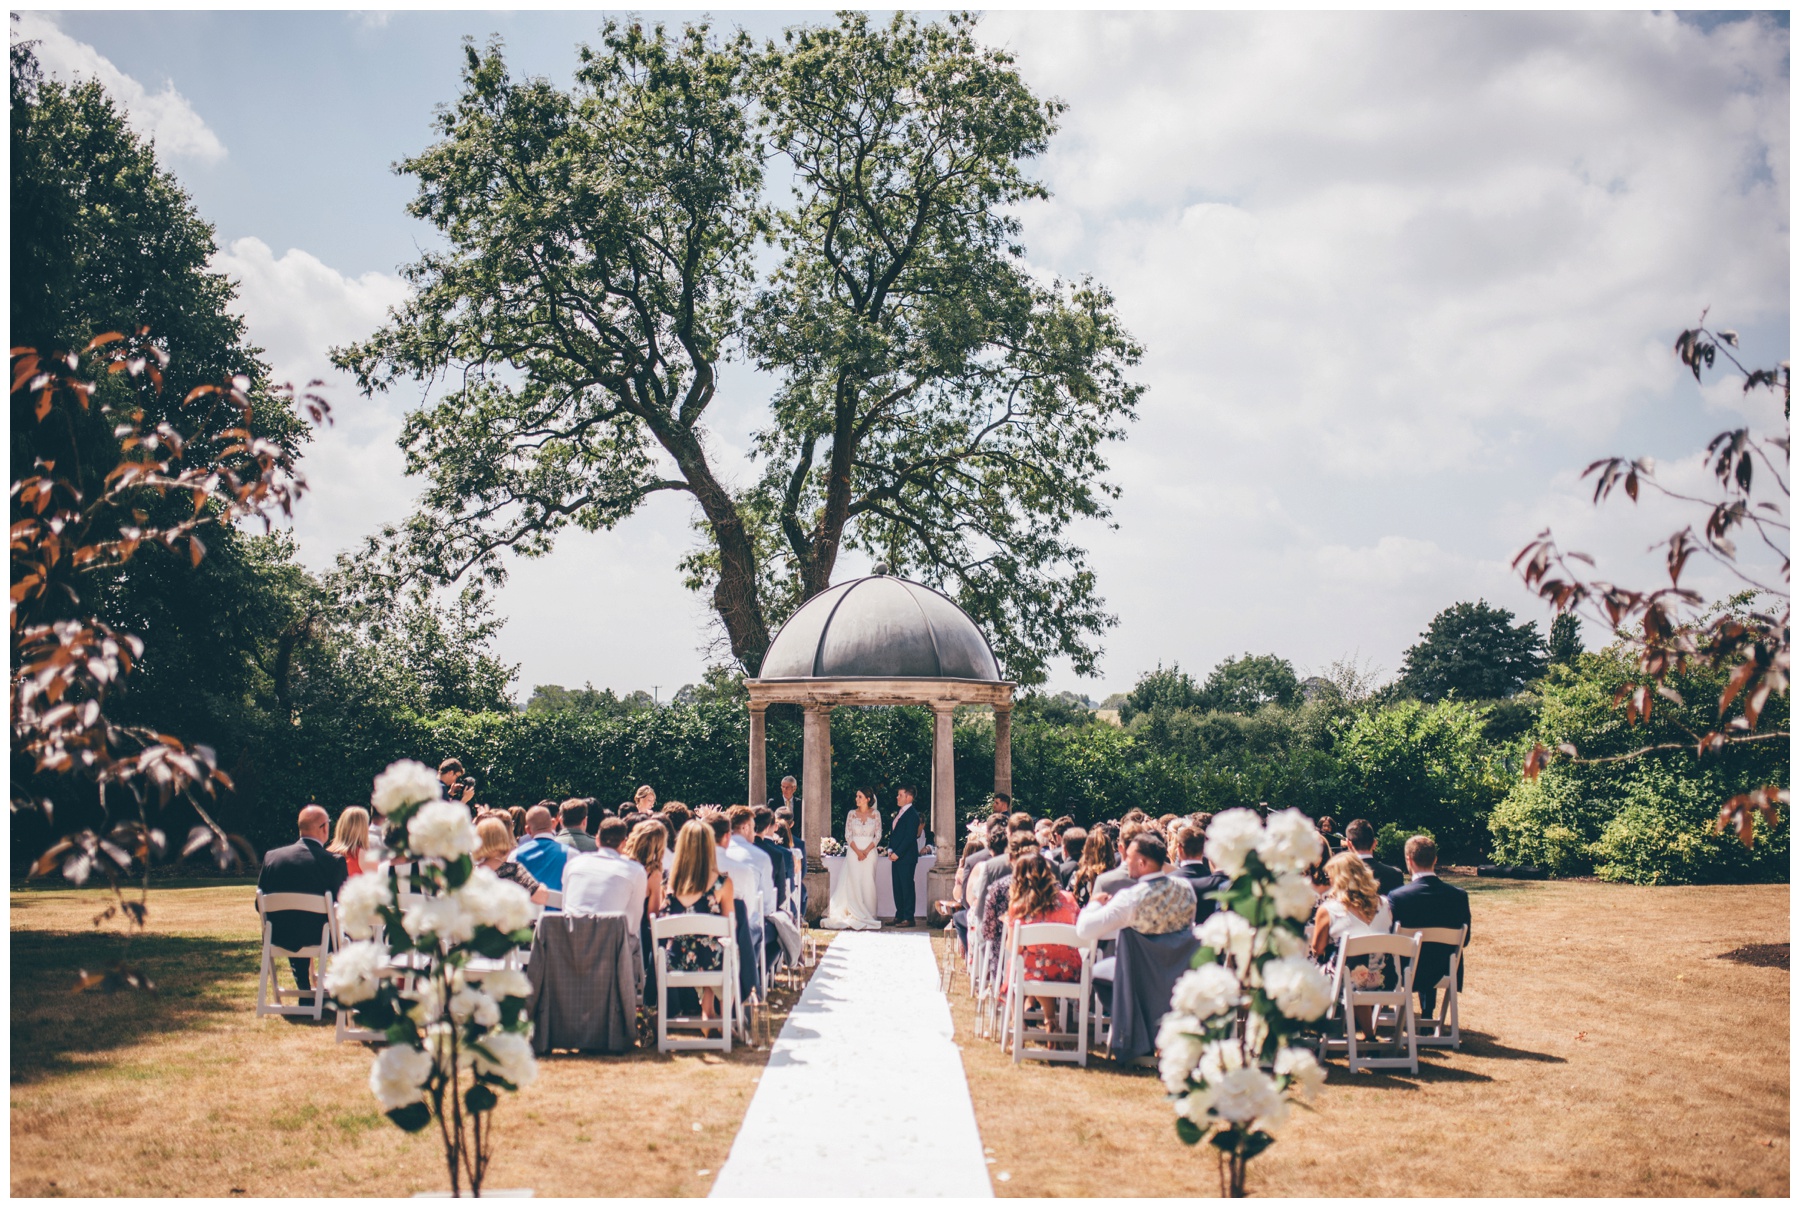 Bride and Groom become husband and wife in an outdoor wedding ceremony at Tilstone House in Tarporley, Cheshire.